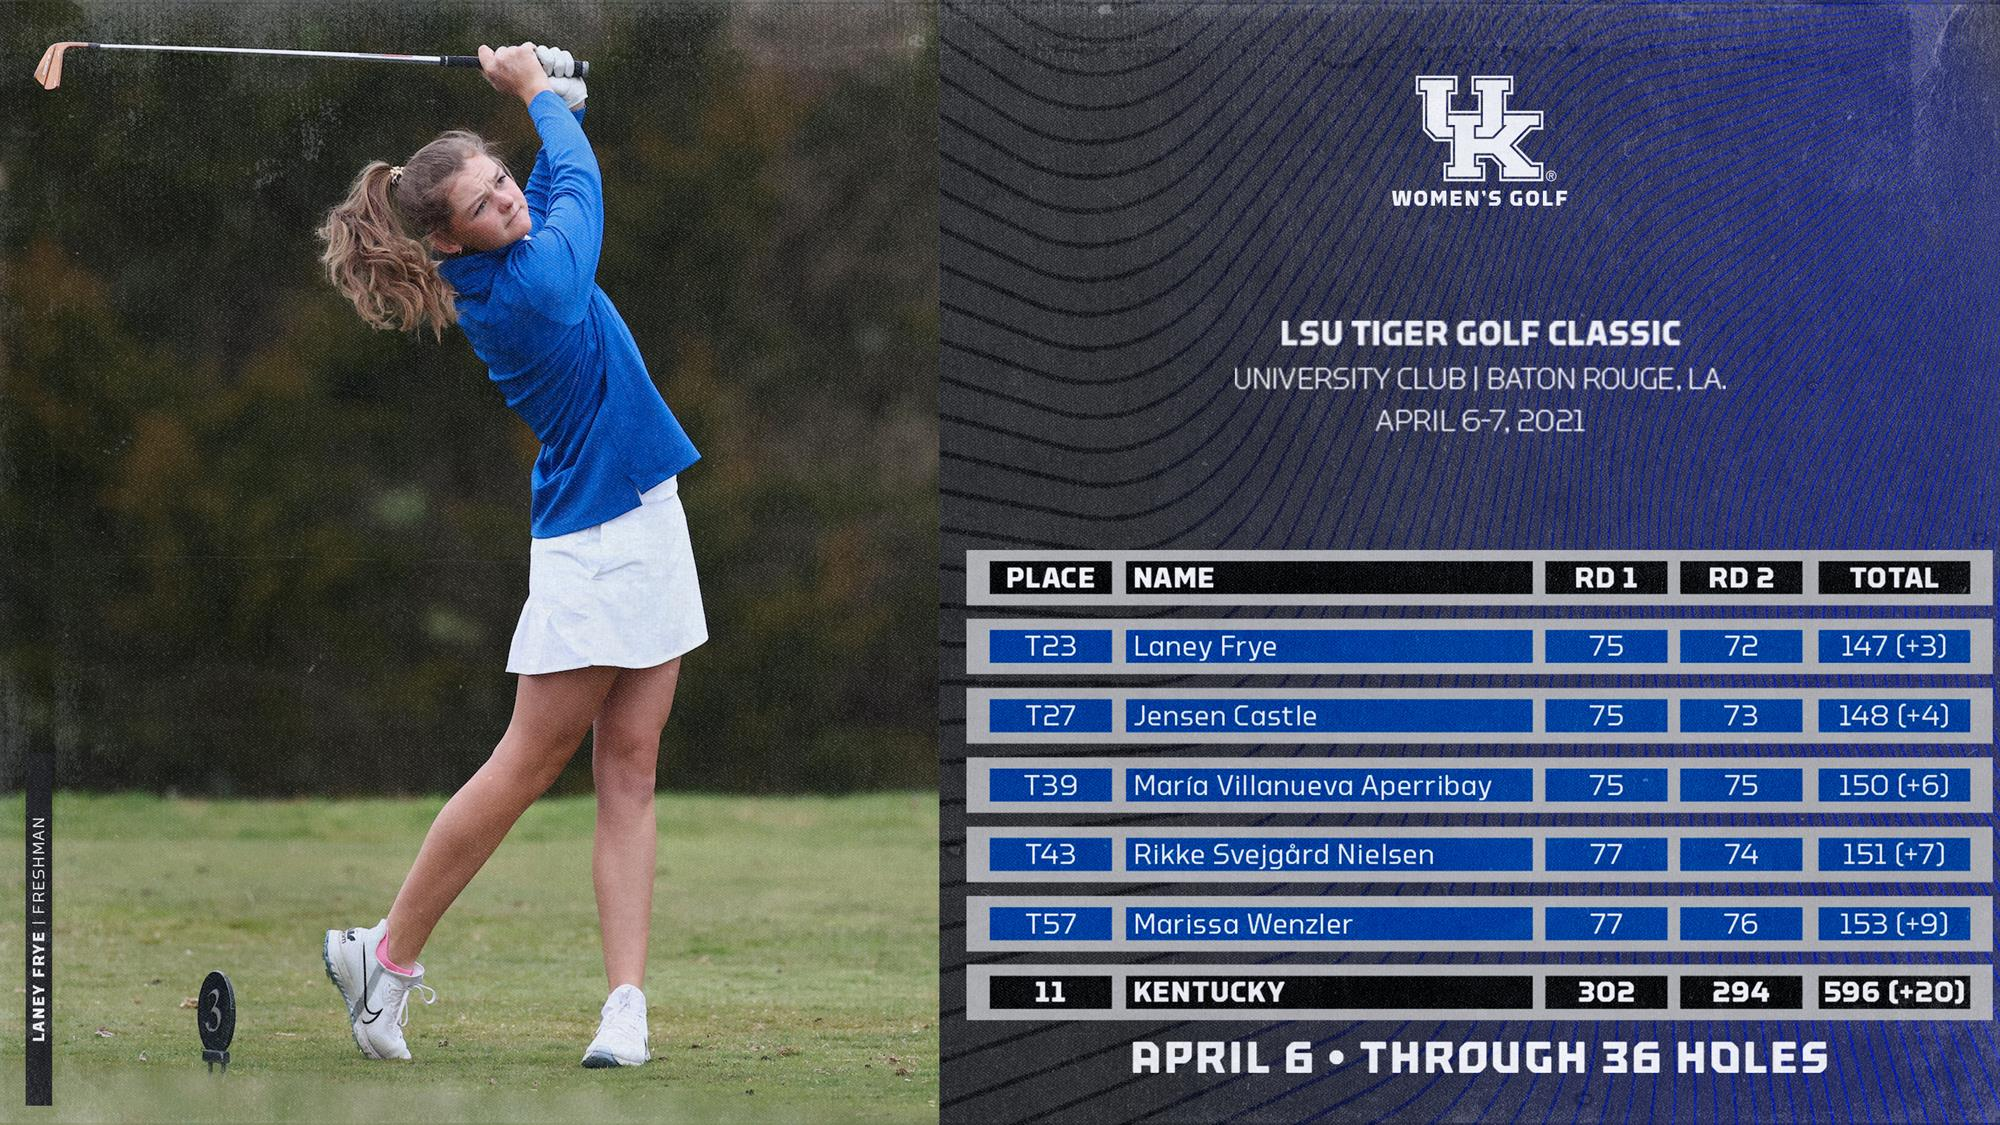 UK Women’s Golf in 11th After 36 Holes at LSU Tiger Golf Classic